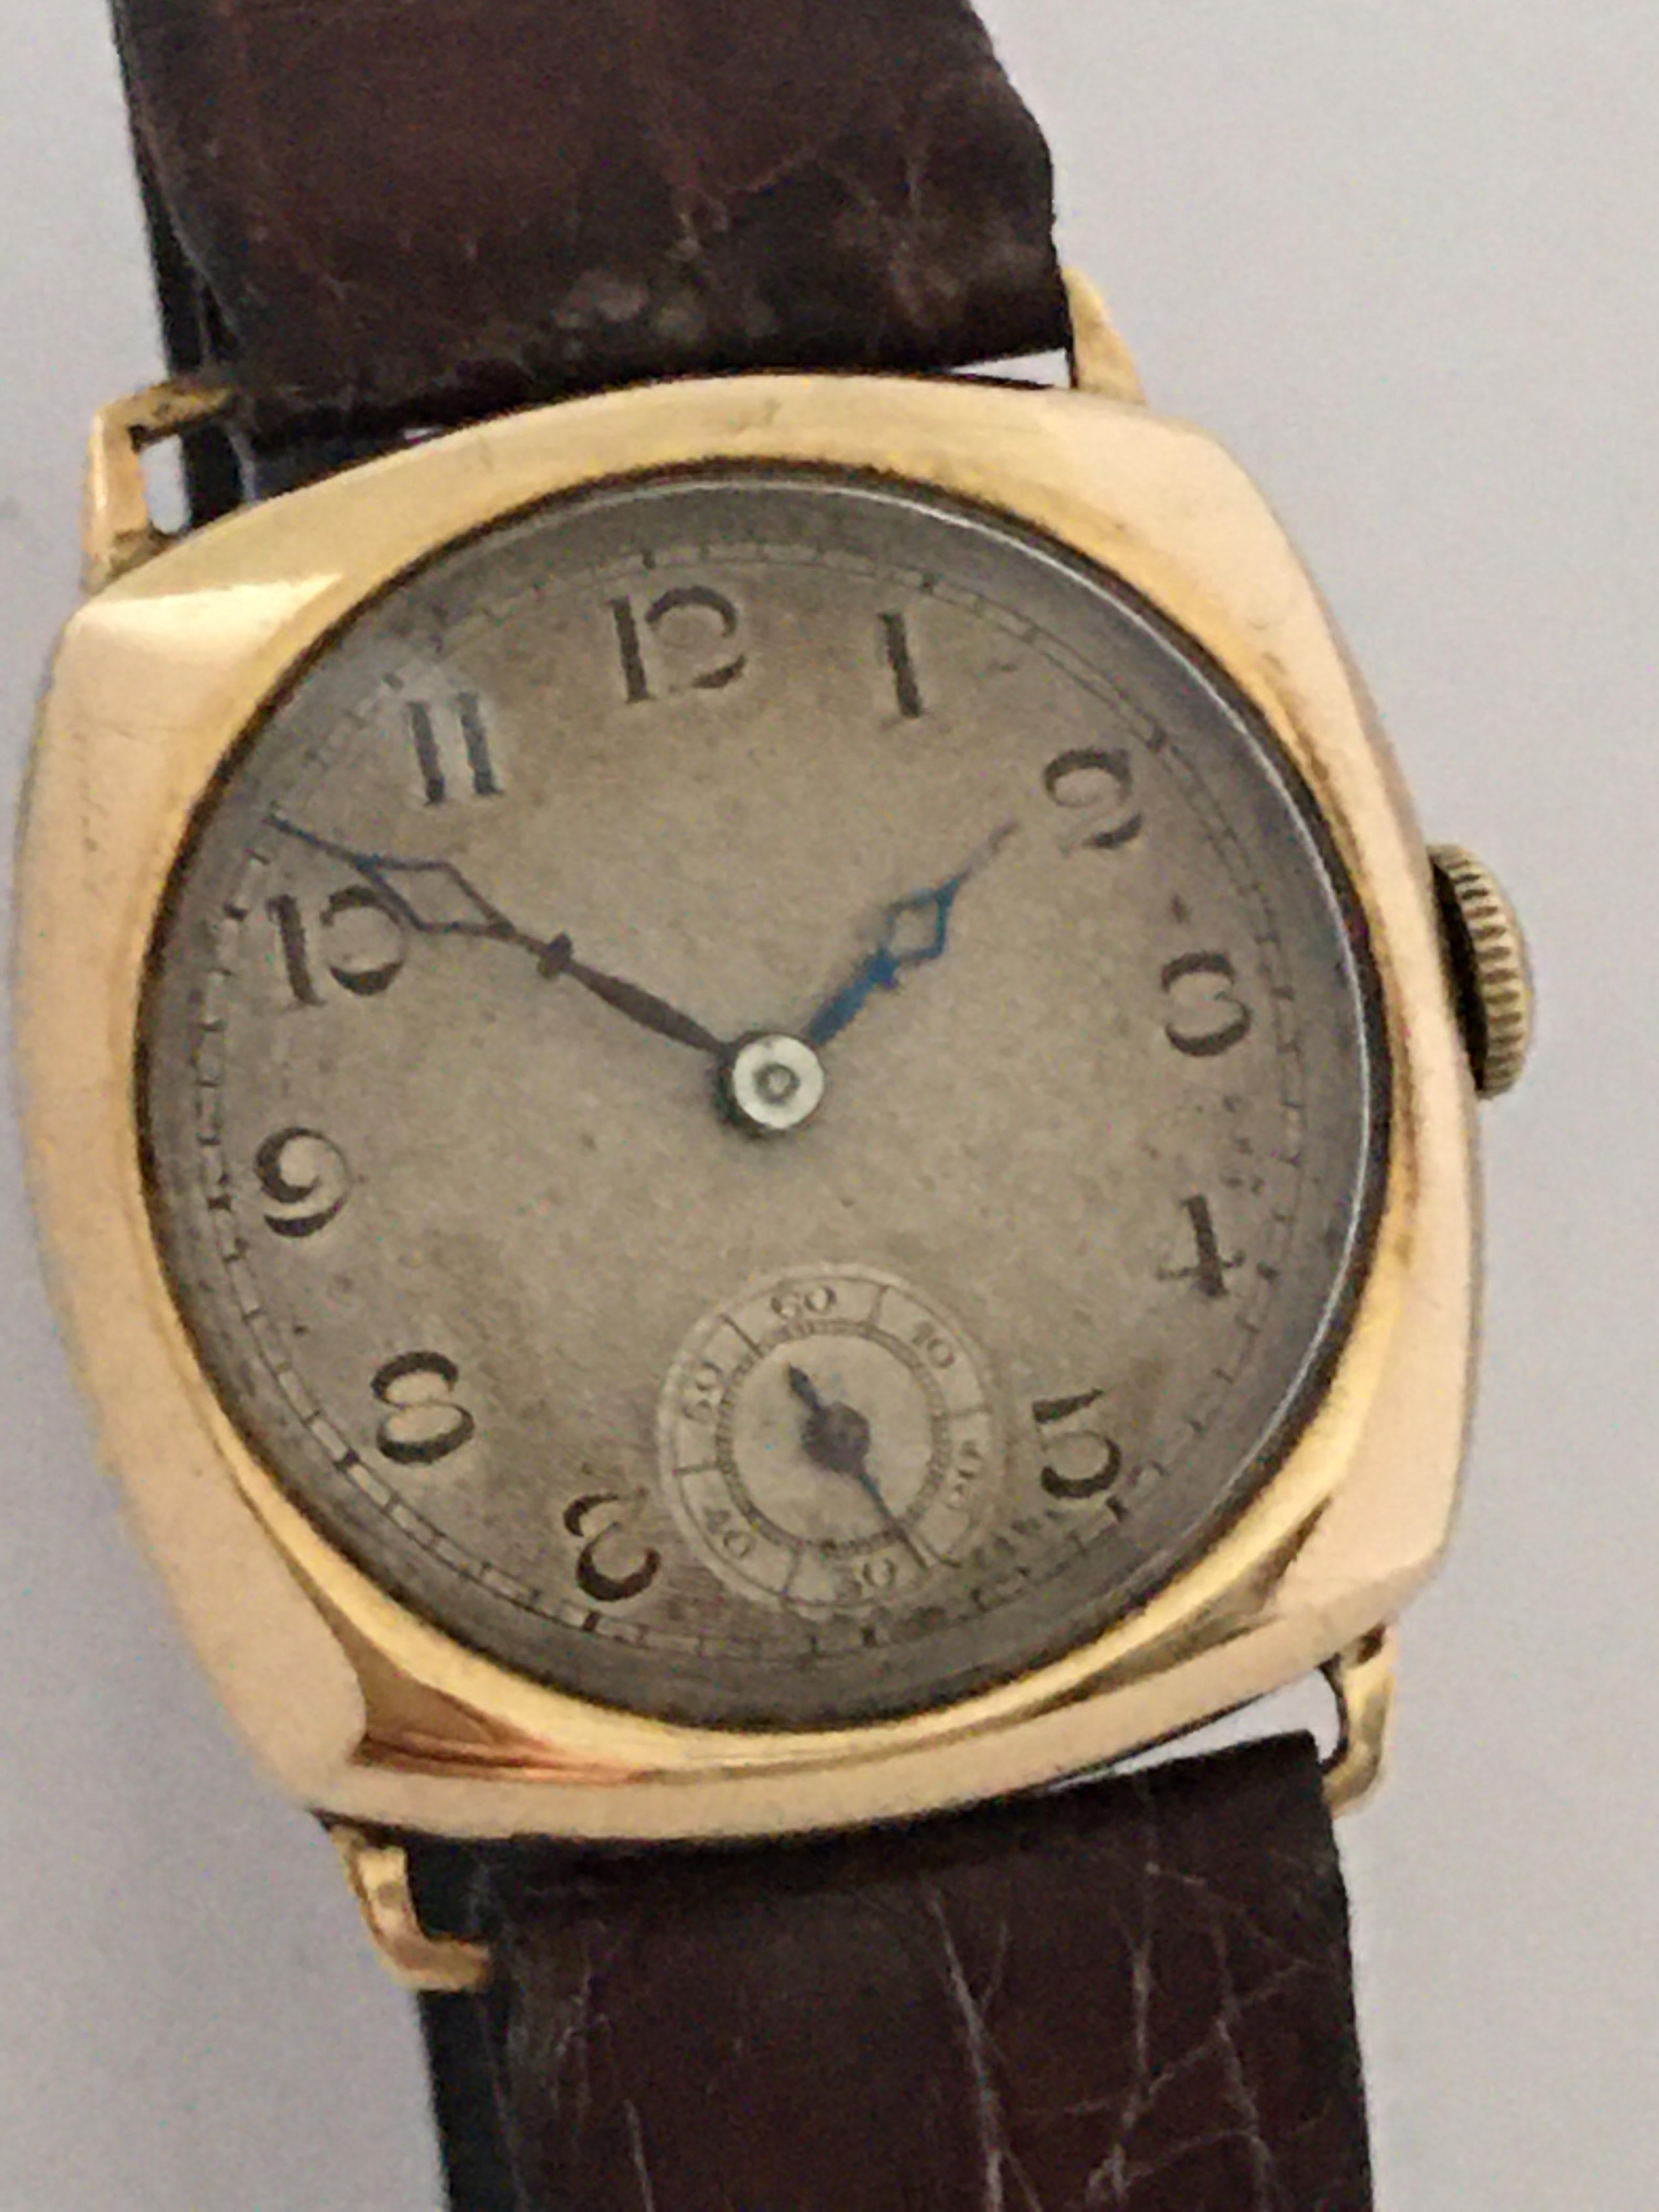 This is a beautiful example of a classic 1950’s cushion Gold Watch with British Made gold case and a manual winding Swiss watch movement.

It is in good working condition and it is ticking well. The silvered dial has aged. Tiny scratches on the